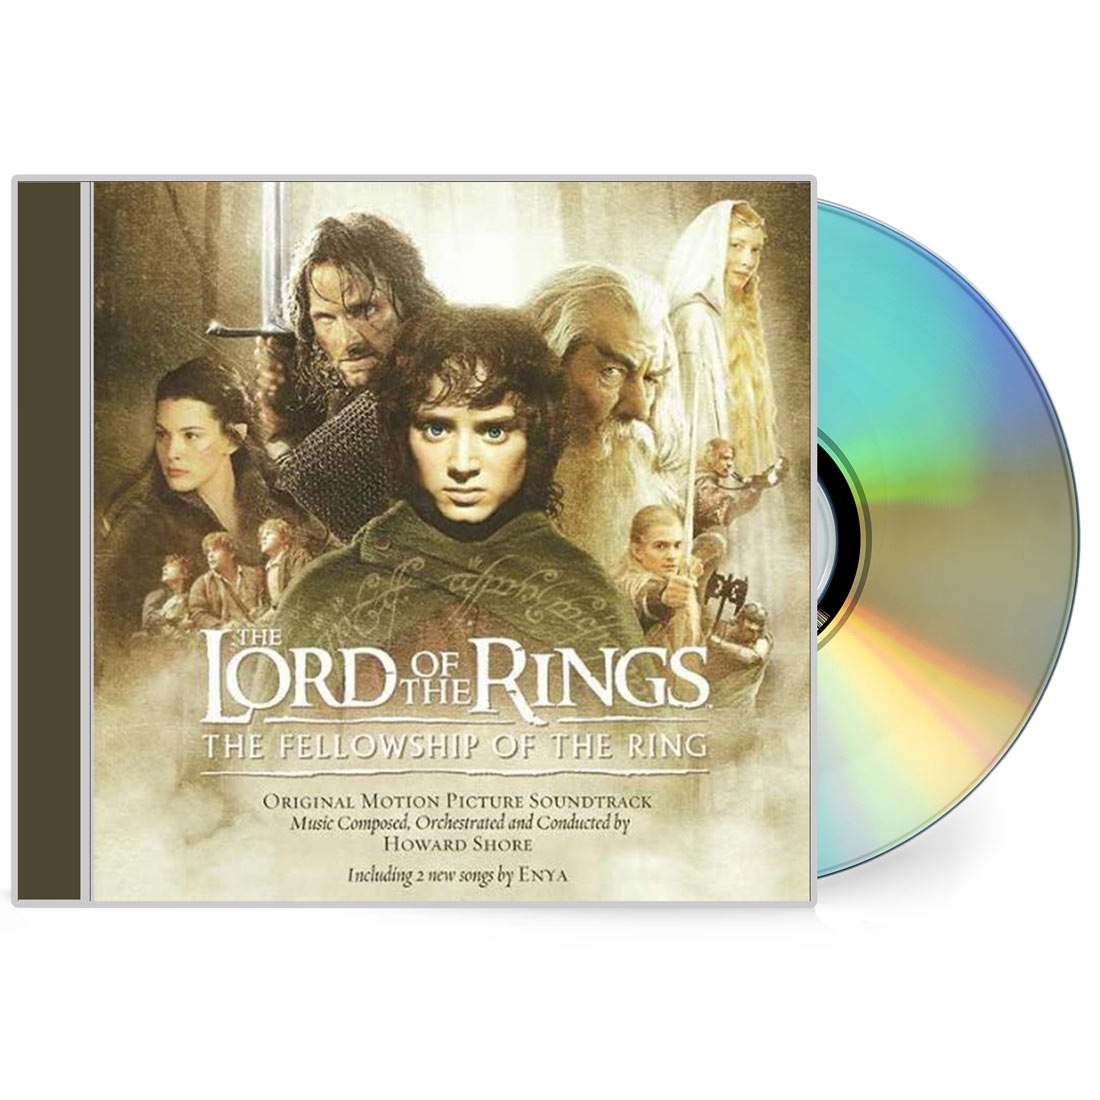 Lord Of The Rings Singers + Orchestra - The Bridge of Khazad Dum